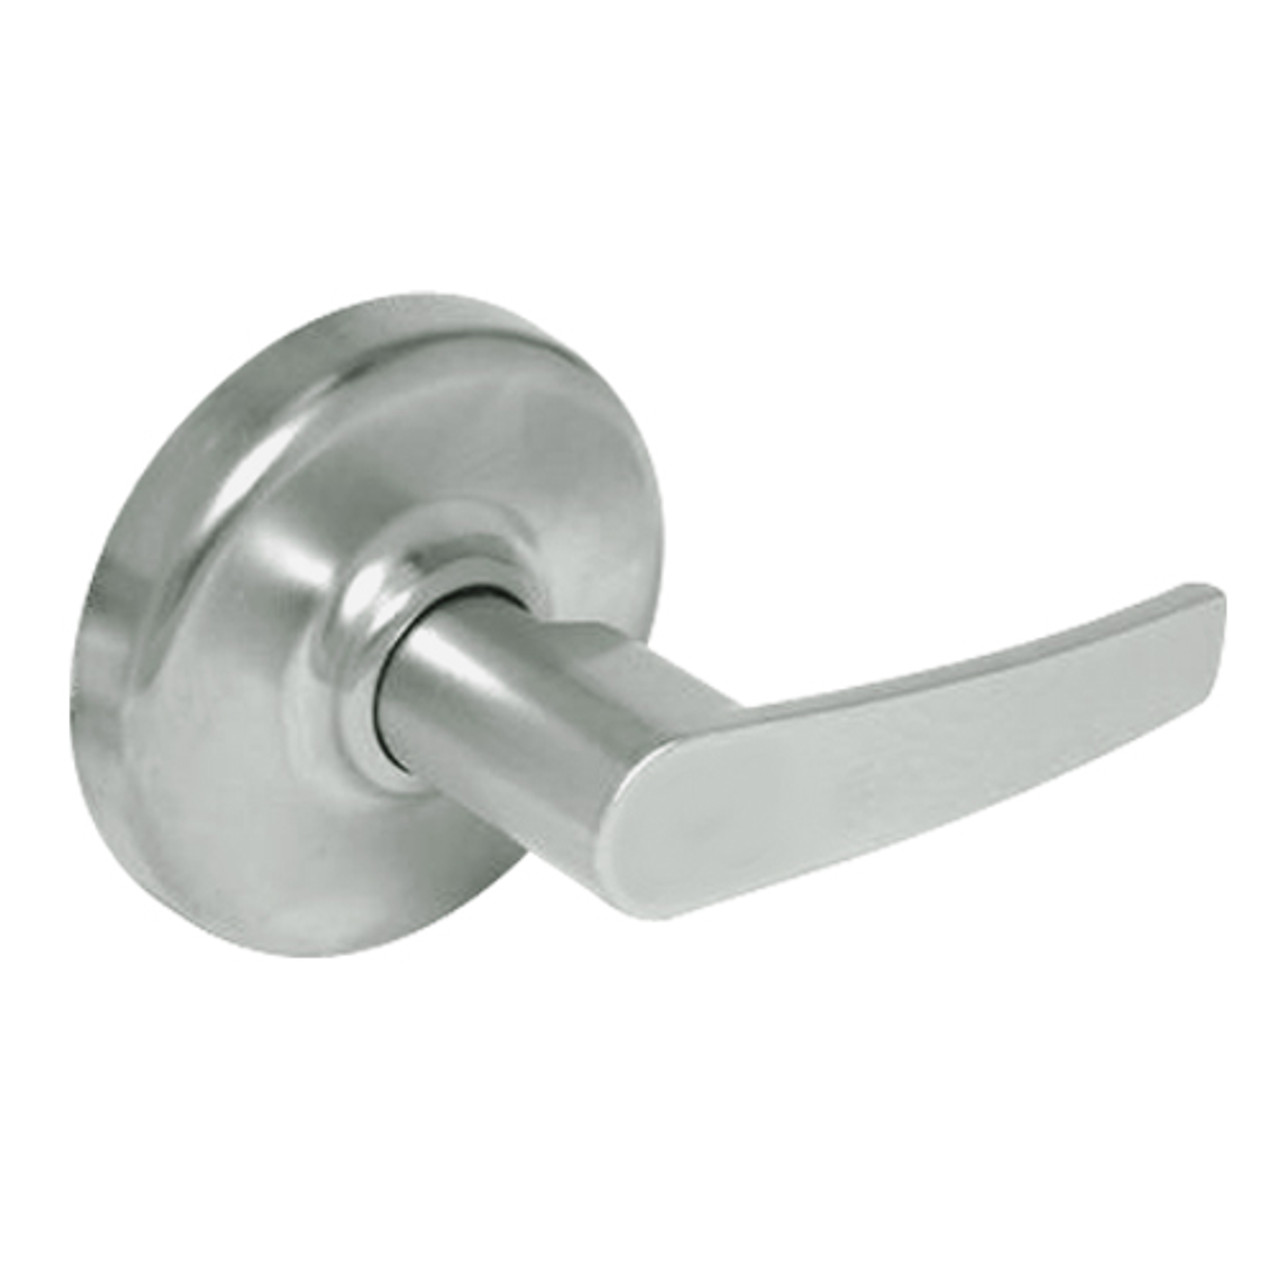 CL3340-AZD-619 Corbin CL3300 Series Extra Heavy Duty Patio Cylindrical Locksets with Armstrong Lever in Satin Nickel Plated Finish